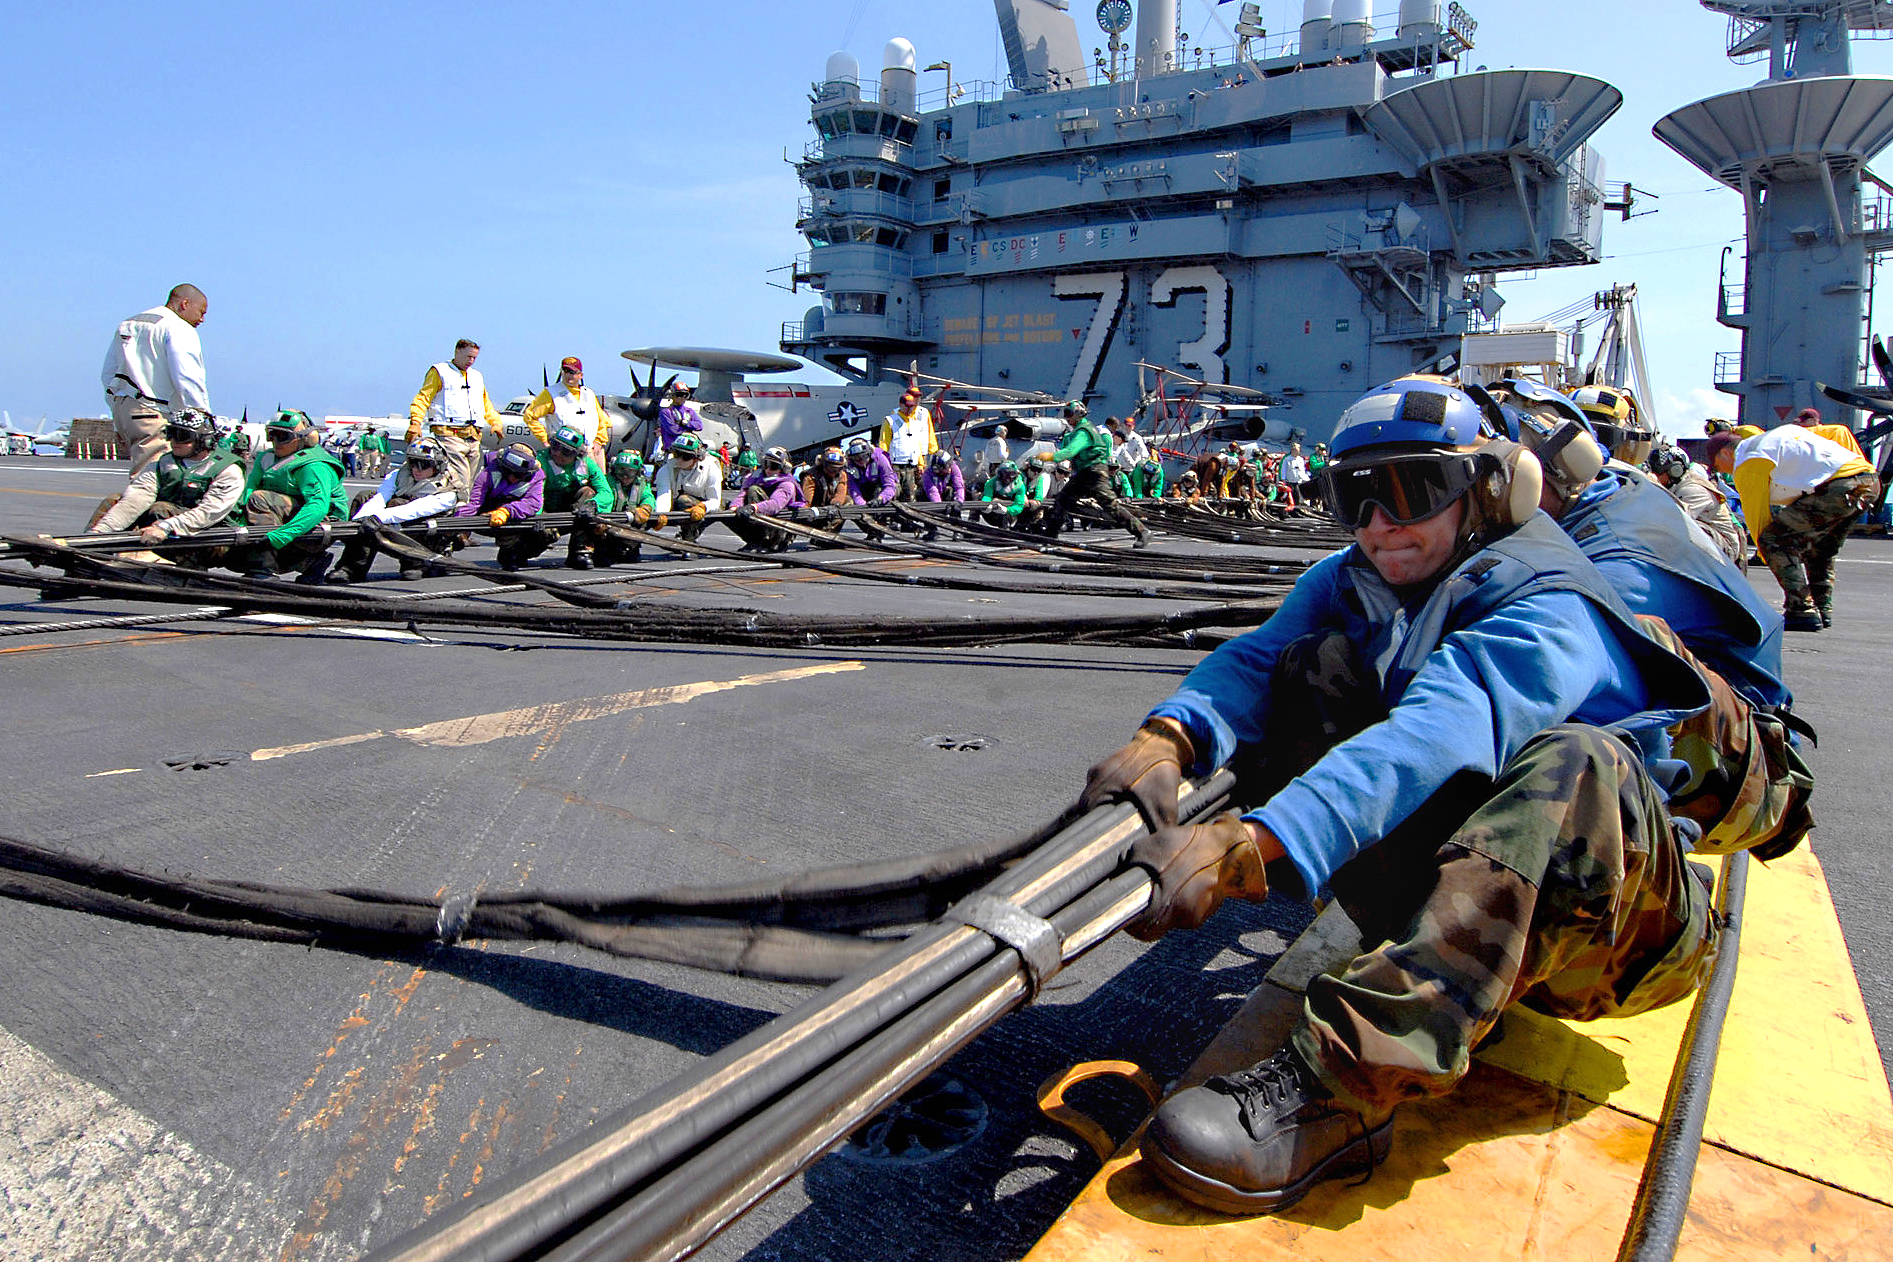 Flight deck personnel from all divisions erect the 'Barricade.' A large net, designed to catch distressed aircraft.